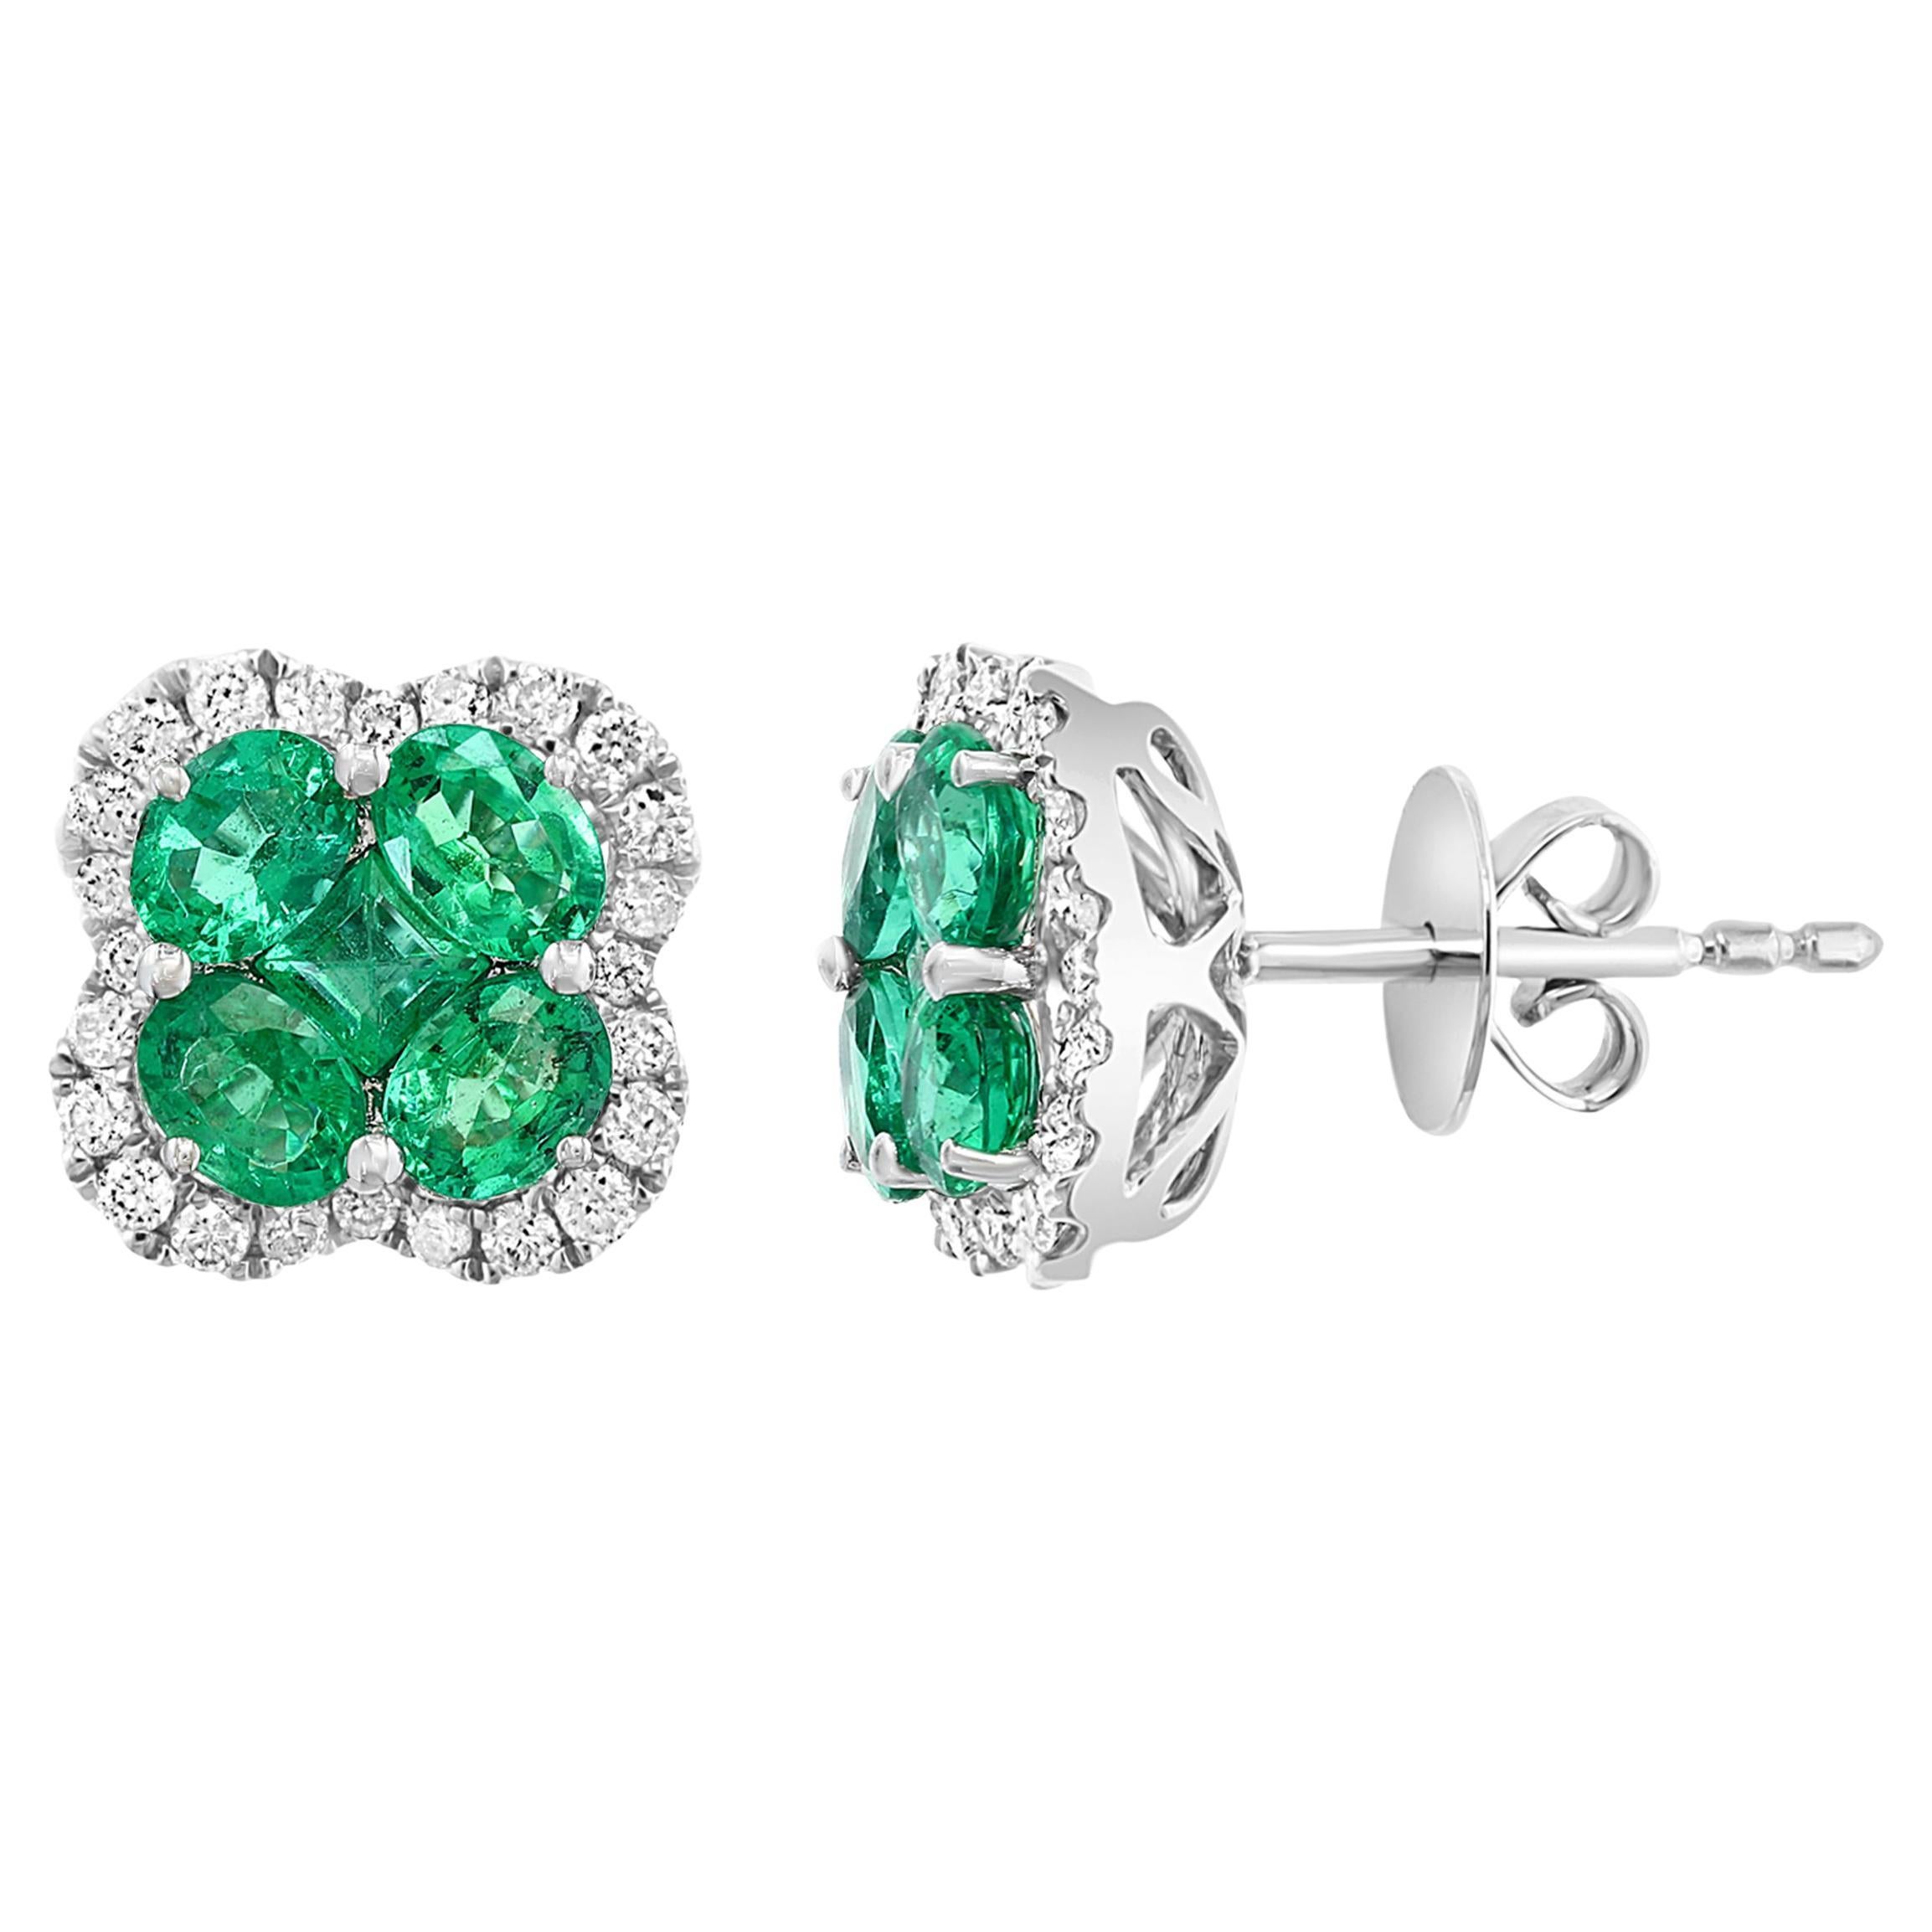 1.16 Carat Oval cut Emerald and Diamond Stud Earrings in 18K White Gold For Sale